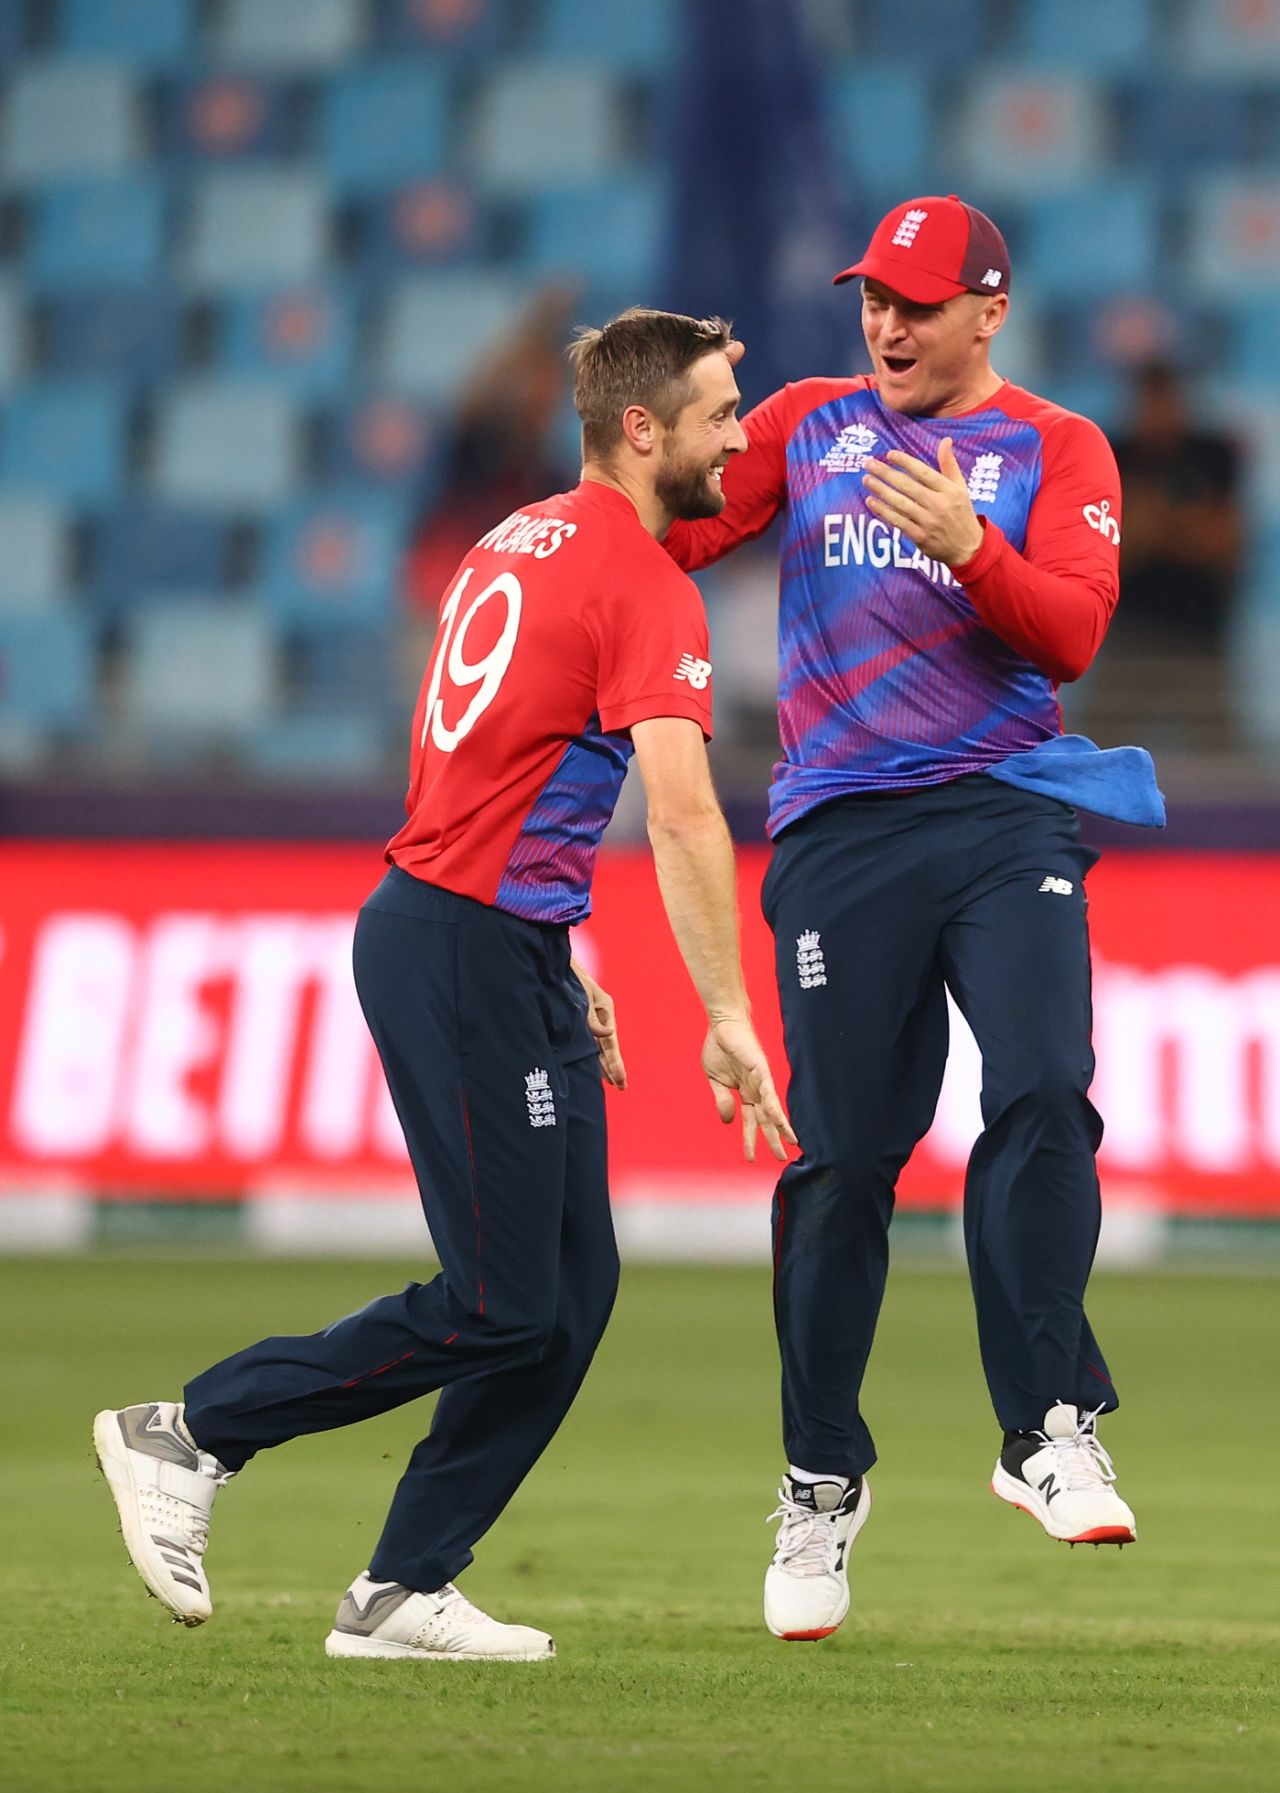 Chris Woakes struck the first the first blow for England, England vs West Indies, Men's T20 World Cup 2021, Super 12s, Dubai, October 23, 2021